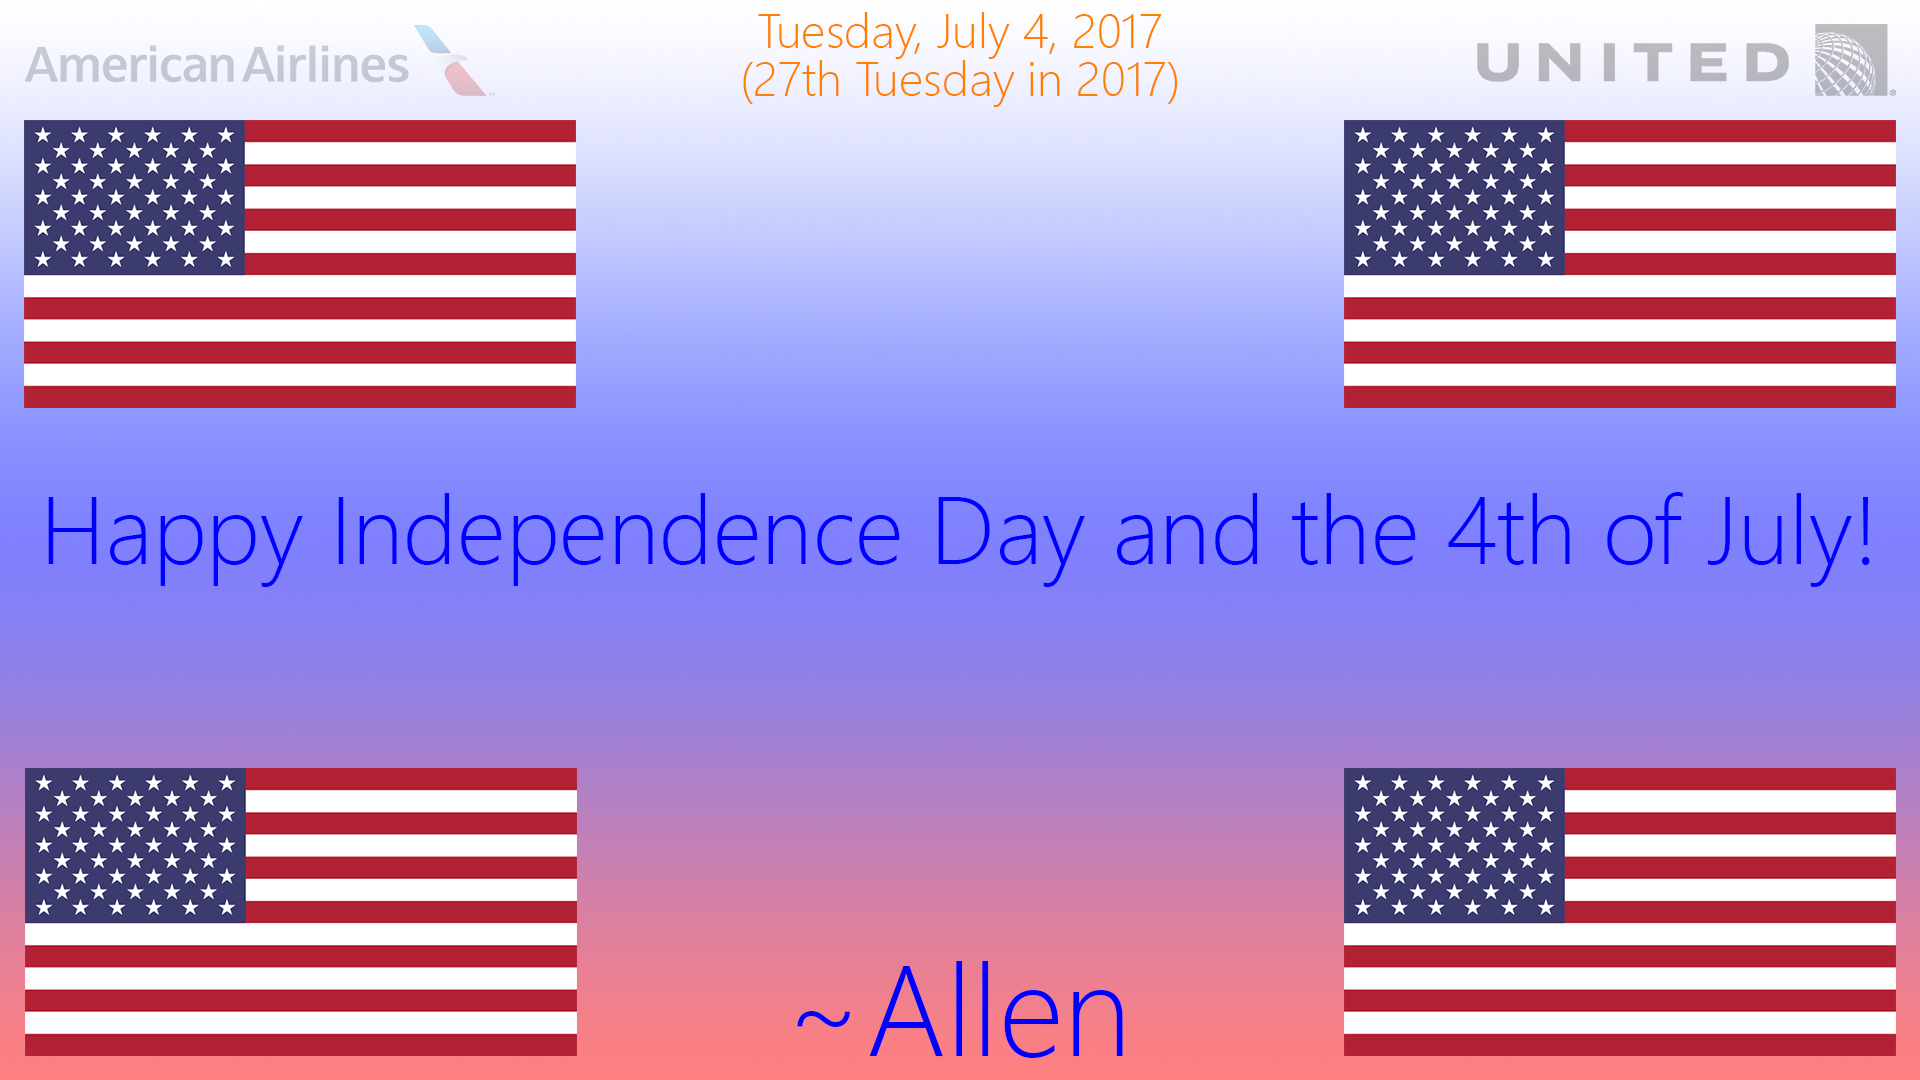 tue_7_4_2017__happy_4th_of_july__by_alle